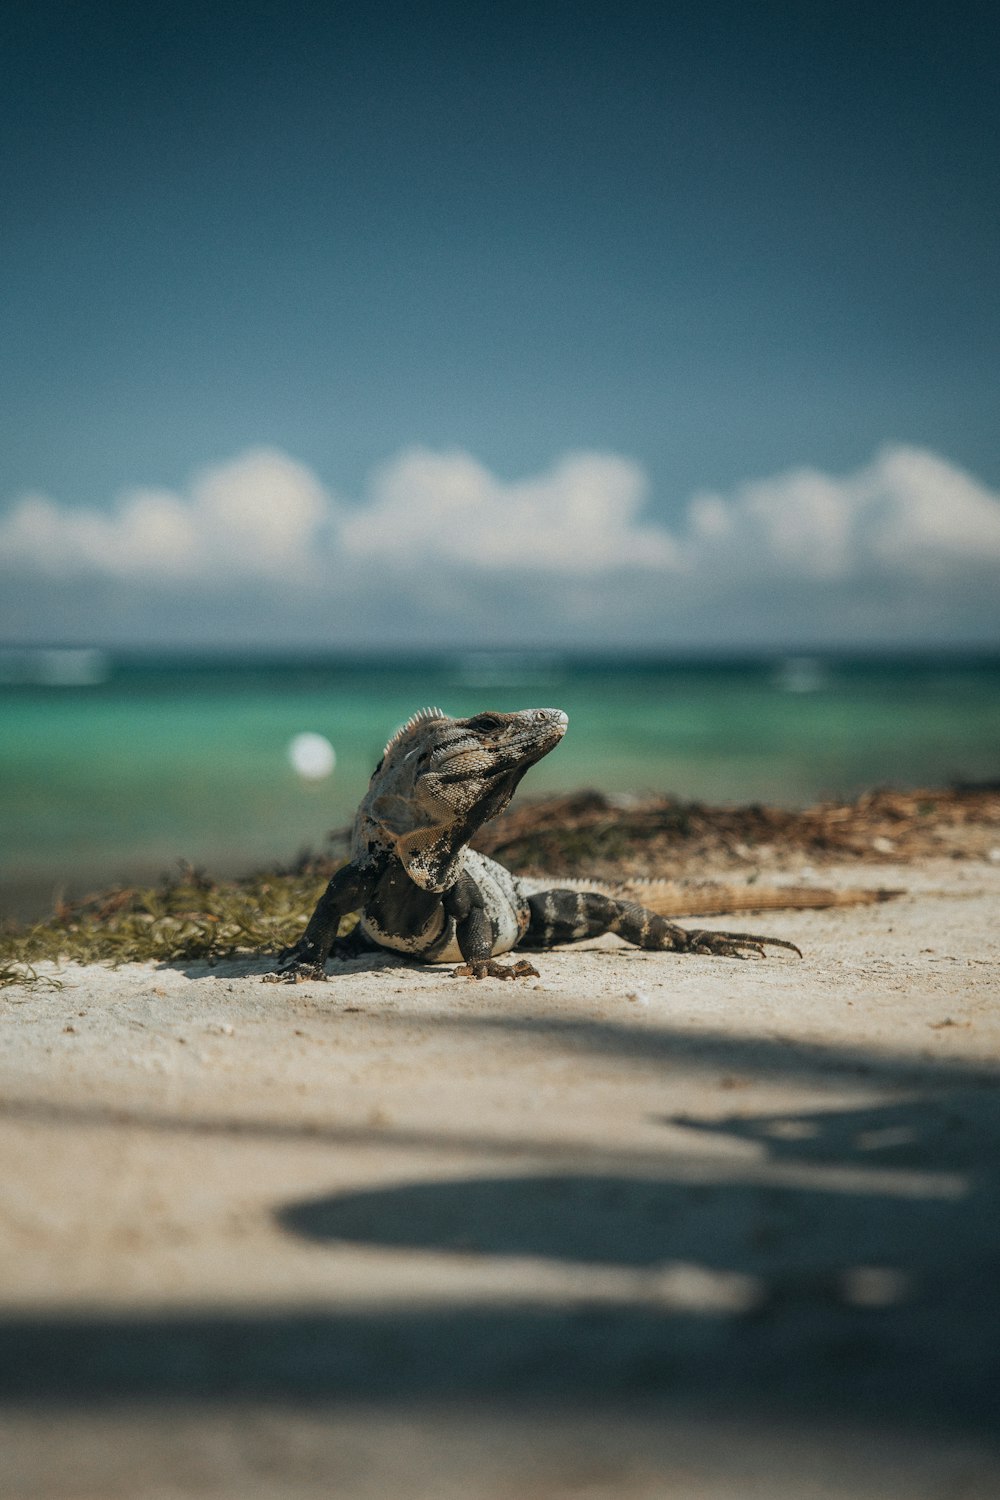 a lizard is sitting on the sand near the water